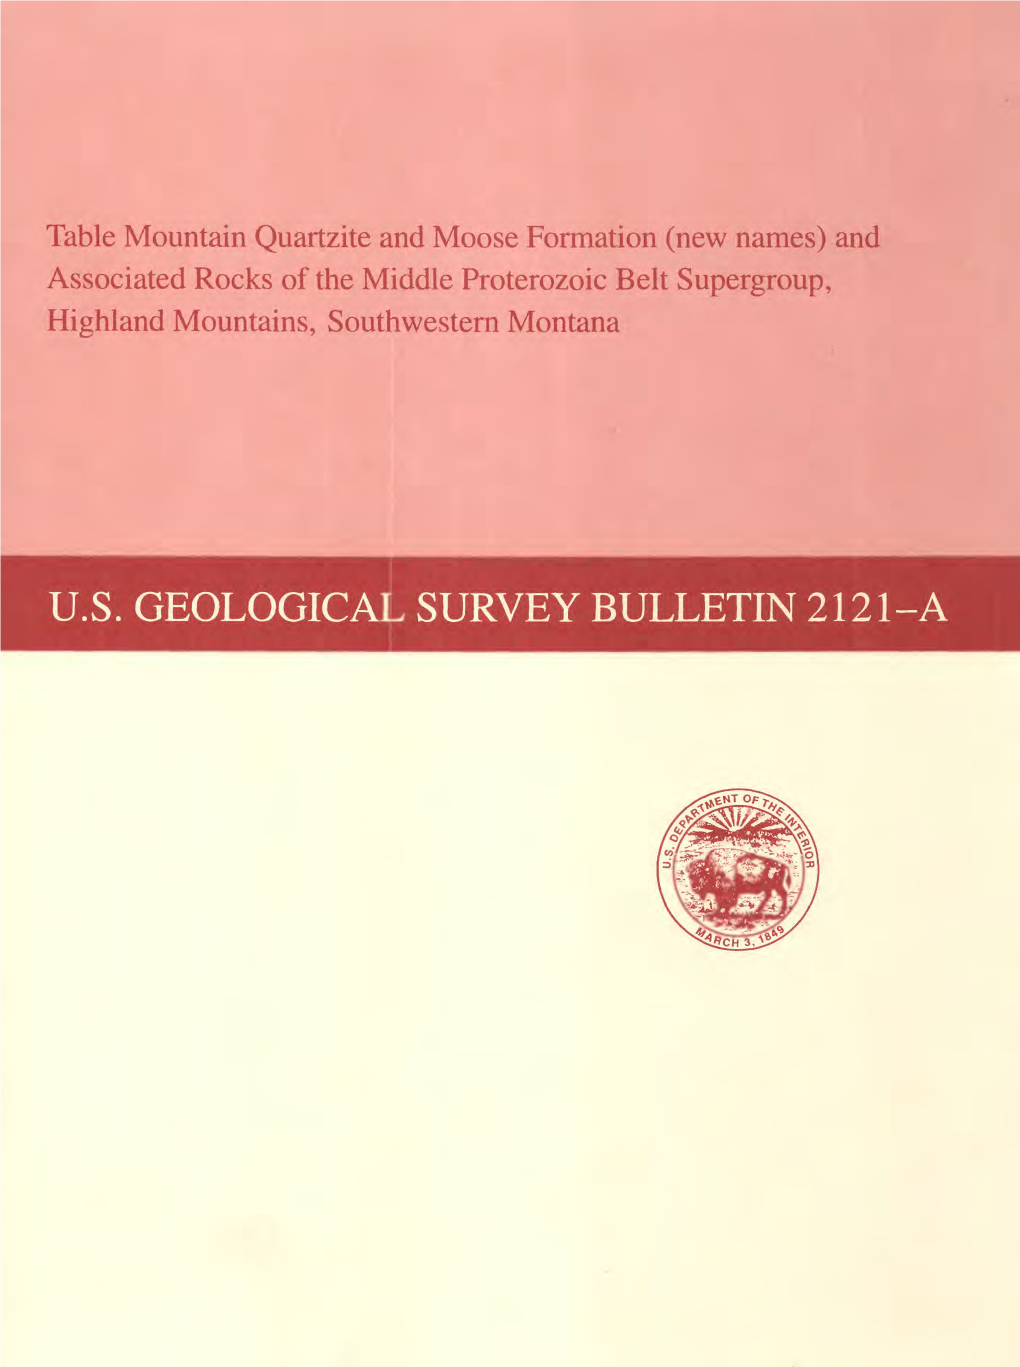 U.S. Geological Survey Bulletin 2121-A Availability of Books and Maps of the U.S